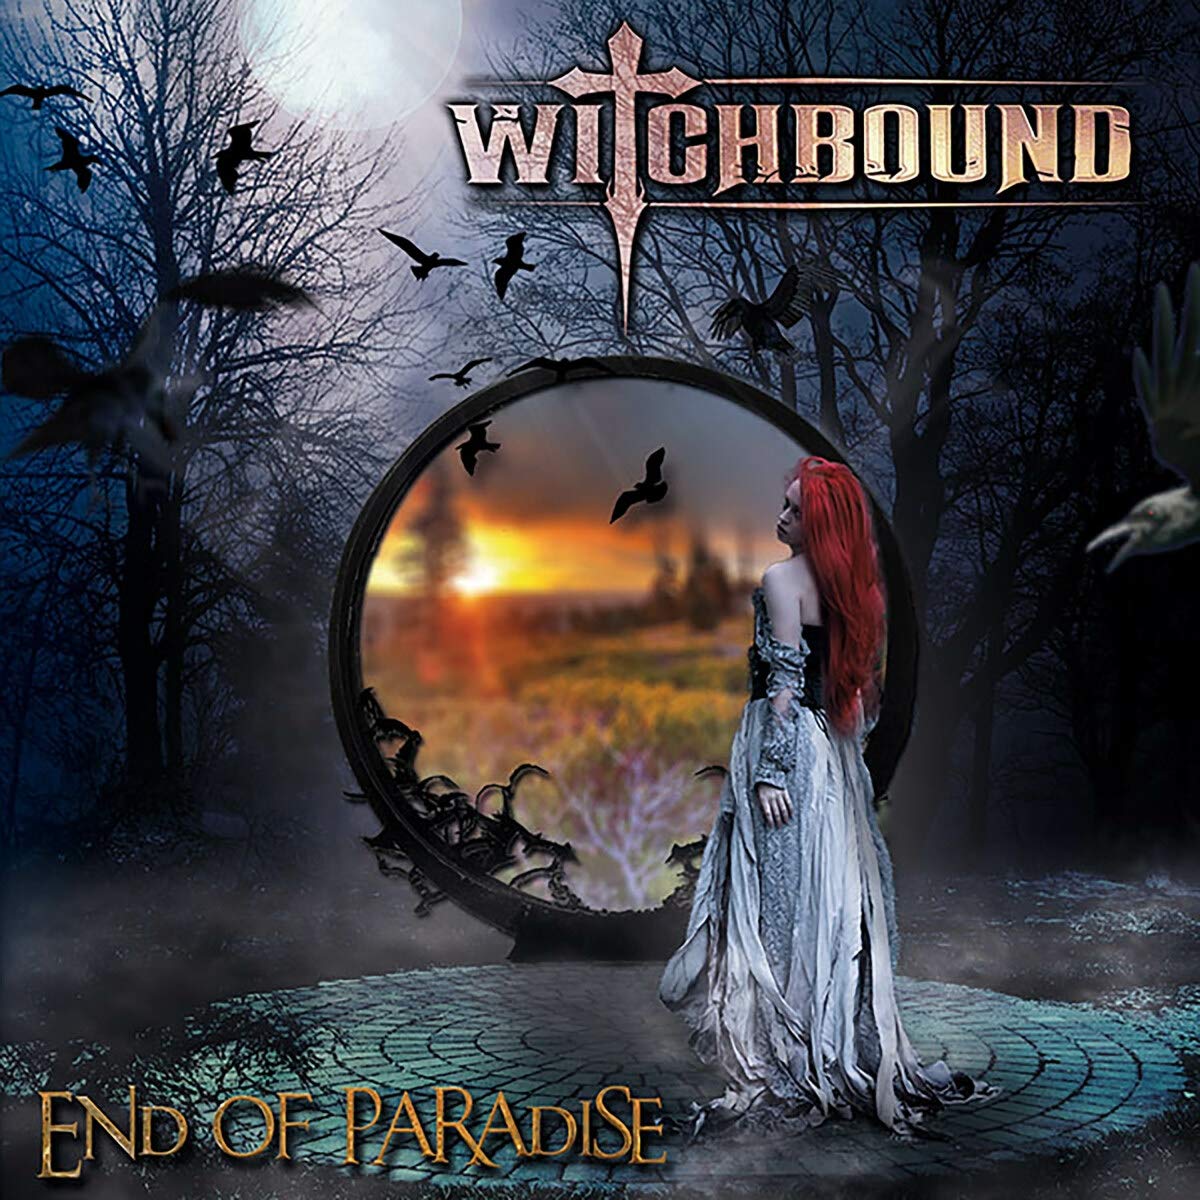 Witchbound-End Of Paradise-(EPR 033-2)-CD-FLAC-2021-WRE